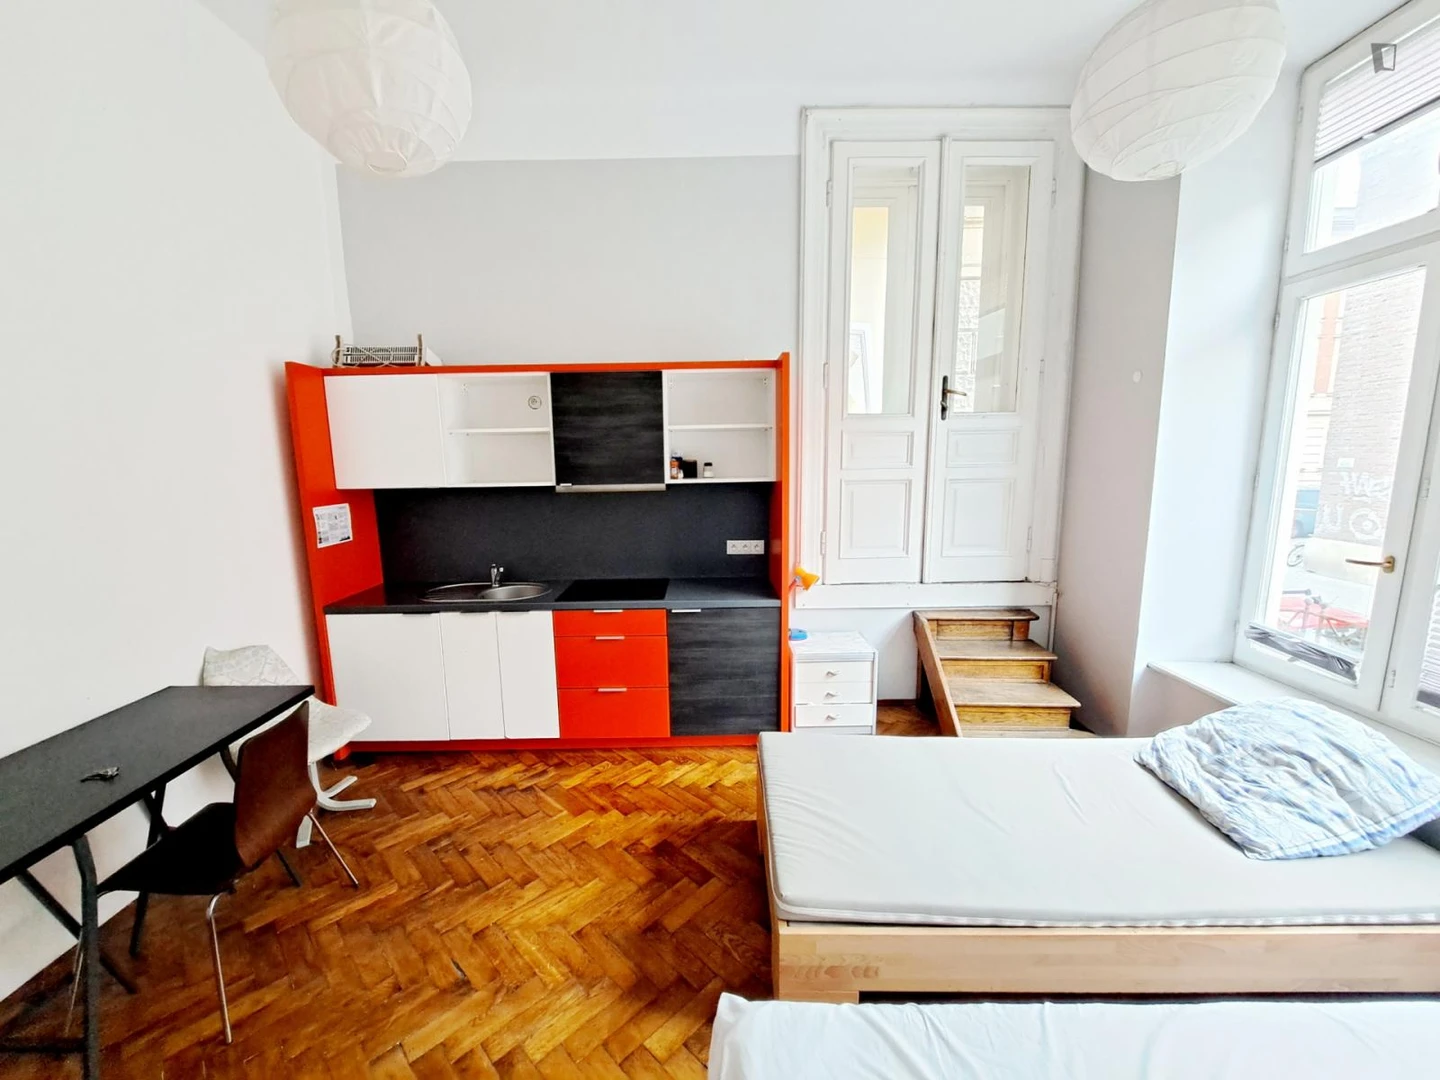 Renting rooms by the month in krakow